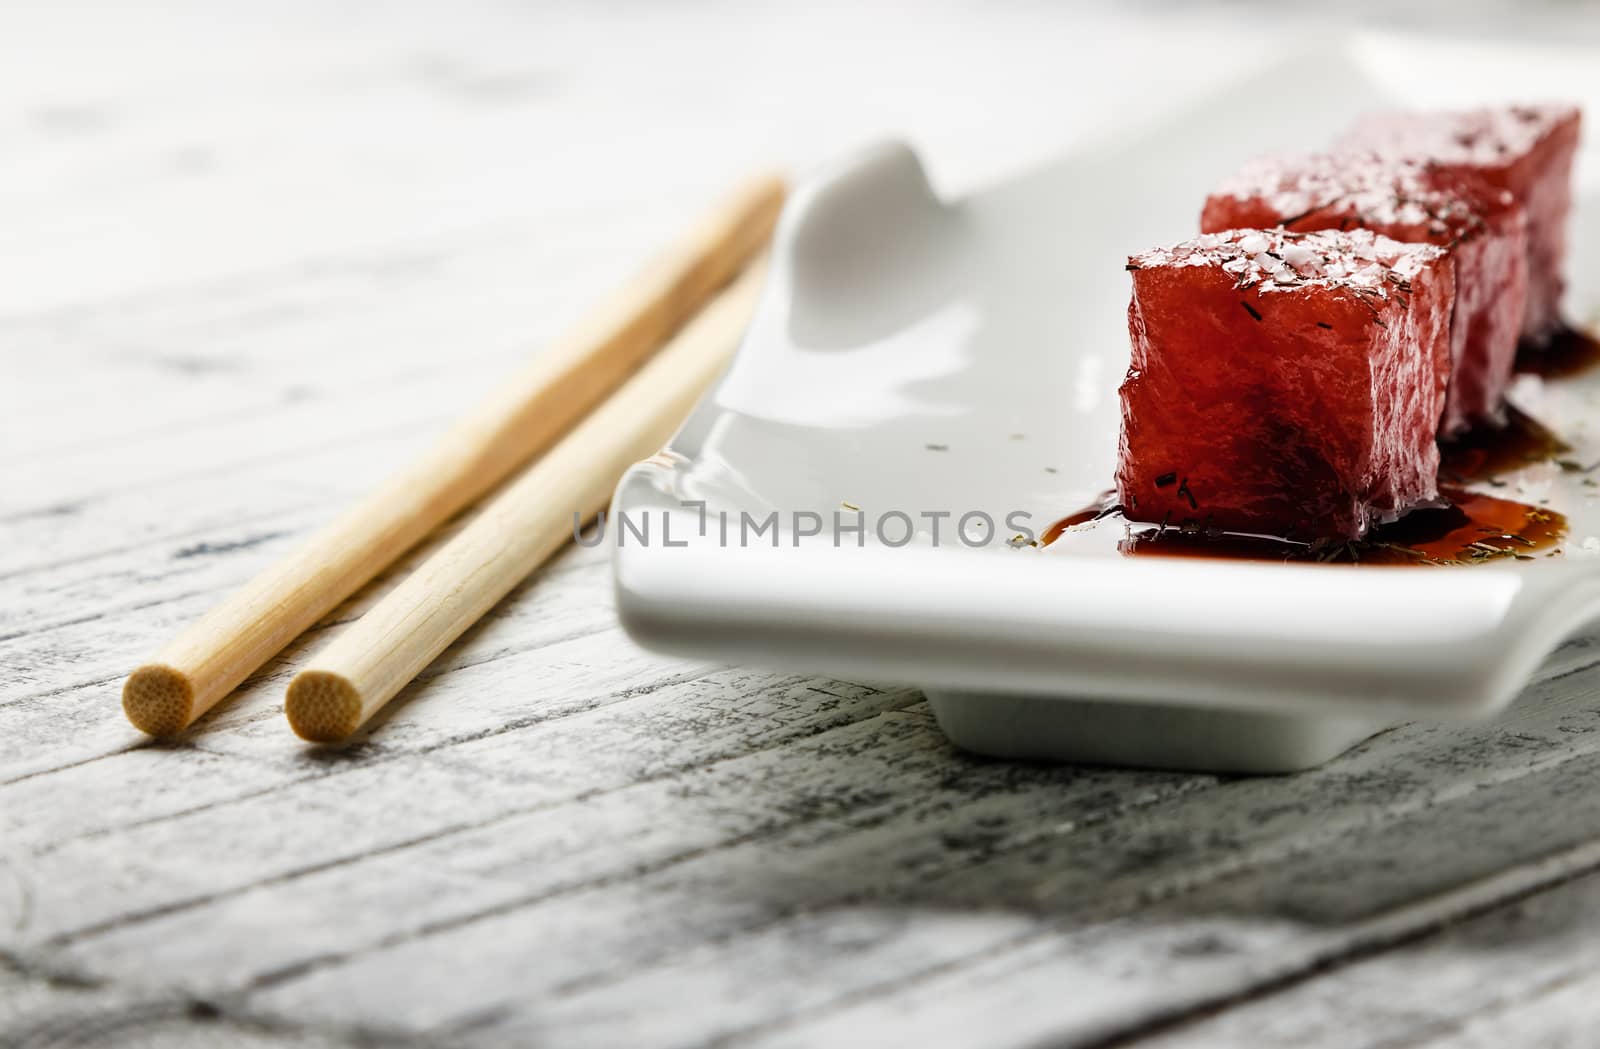 Tuna sashimi dipped in soy sauce,  thick salt and dill on old white wooden board with chopsticks. Raw fish in traditional Japanese style. Horizontal image.